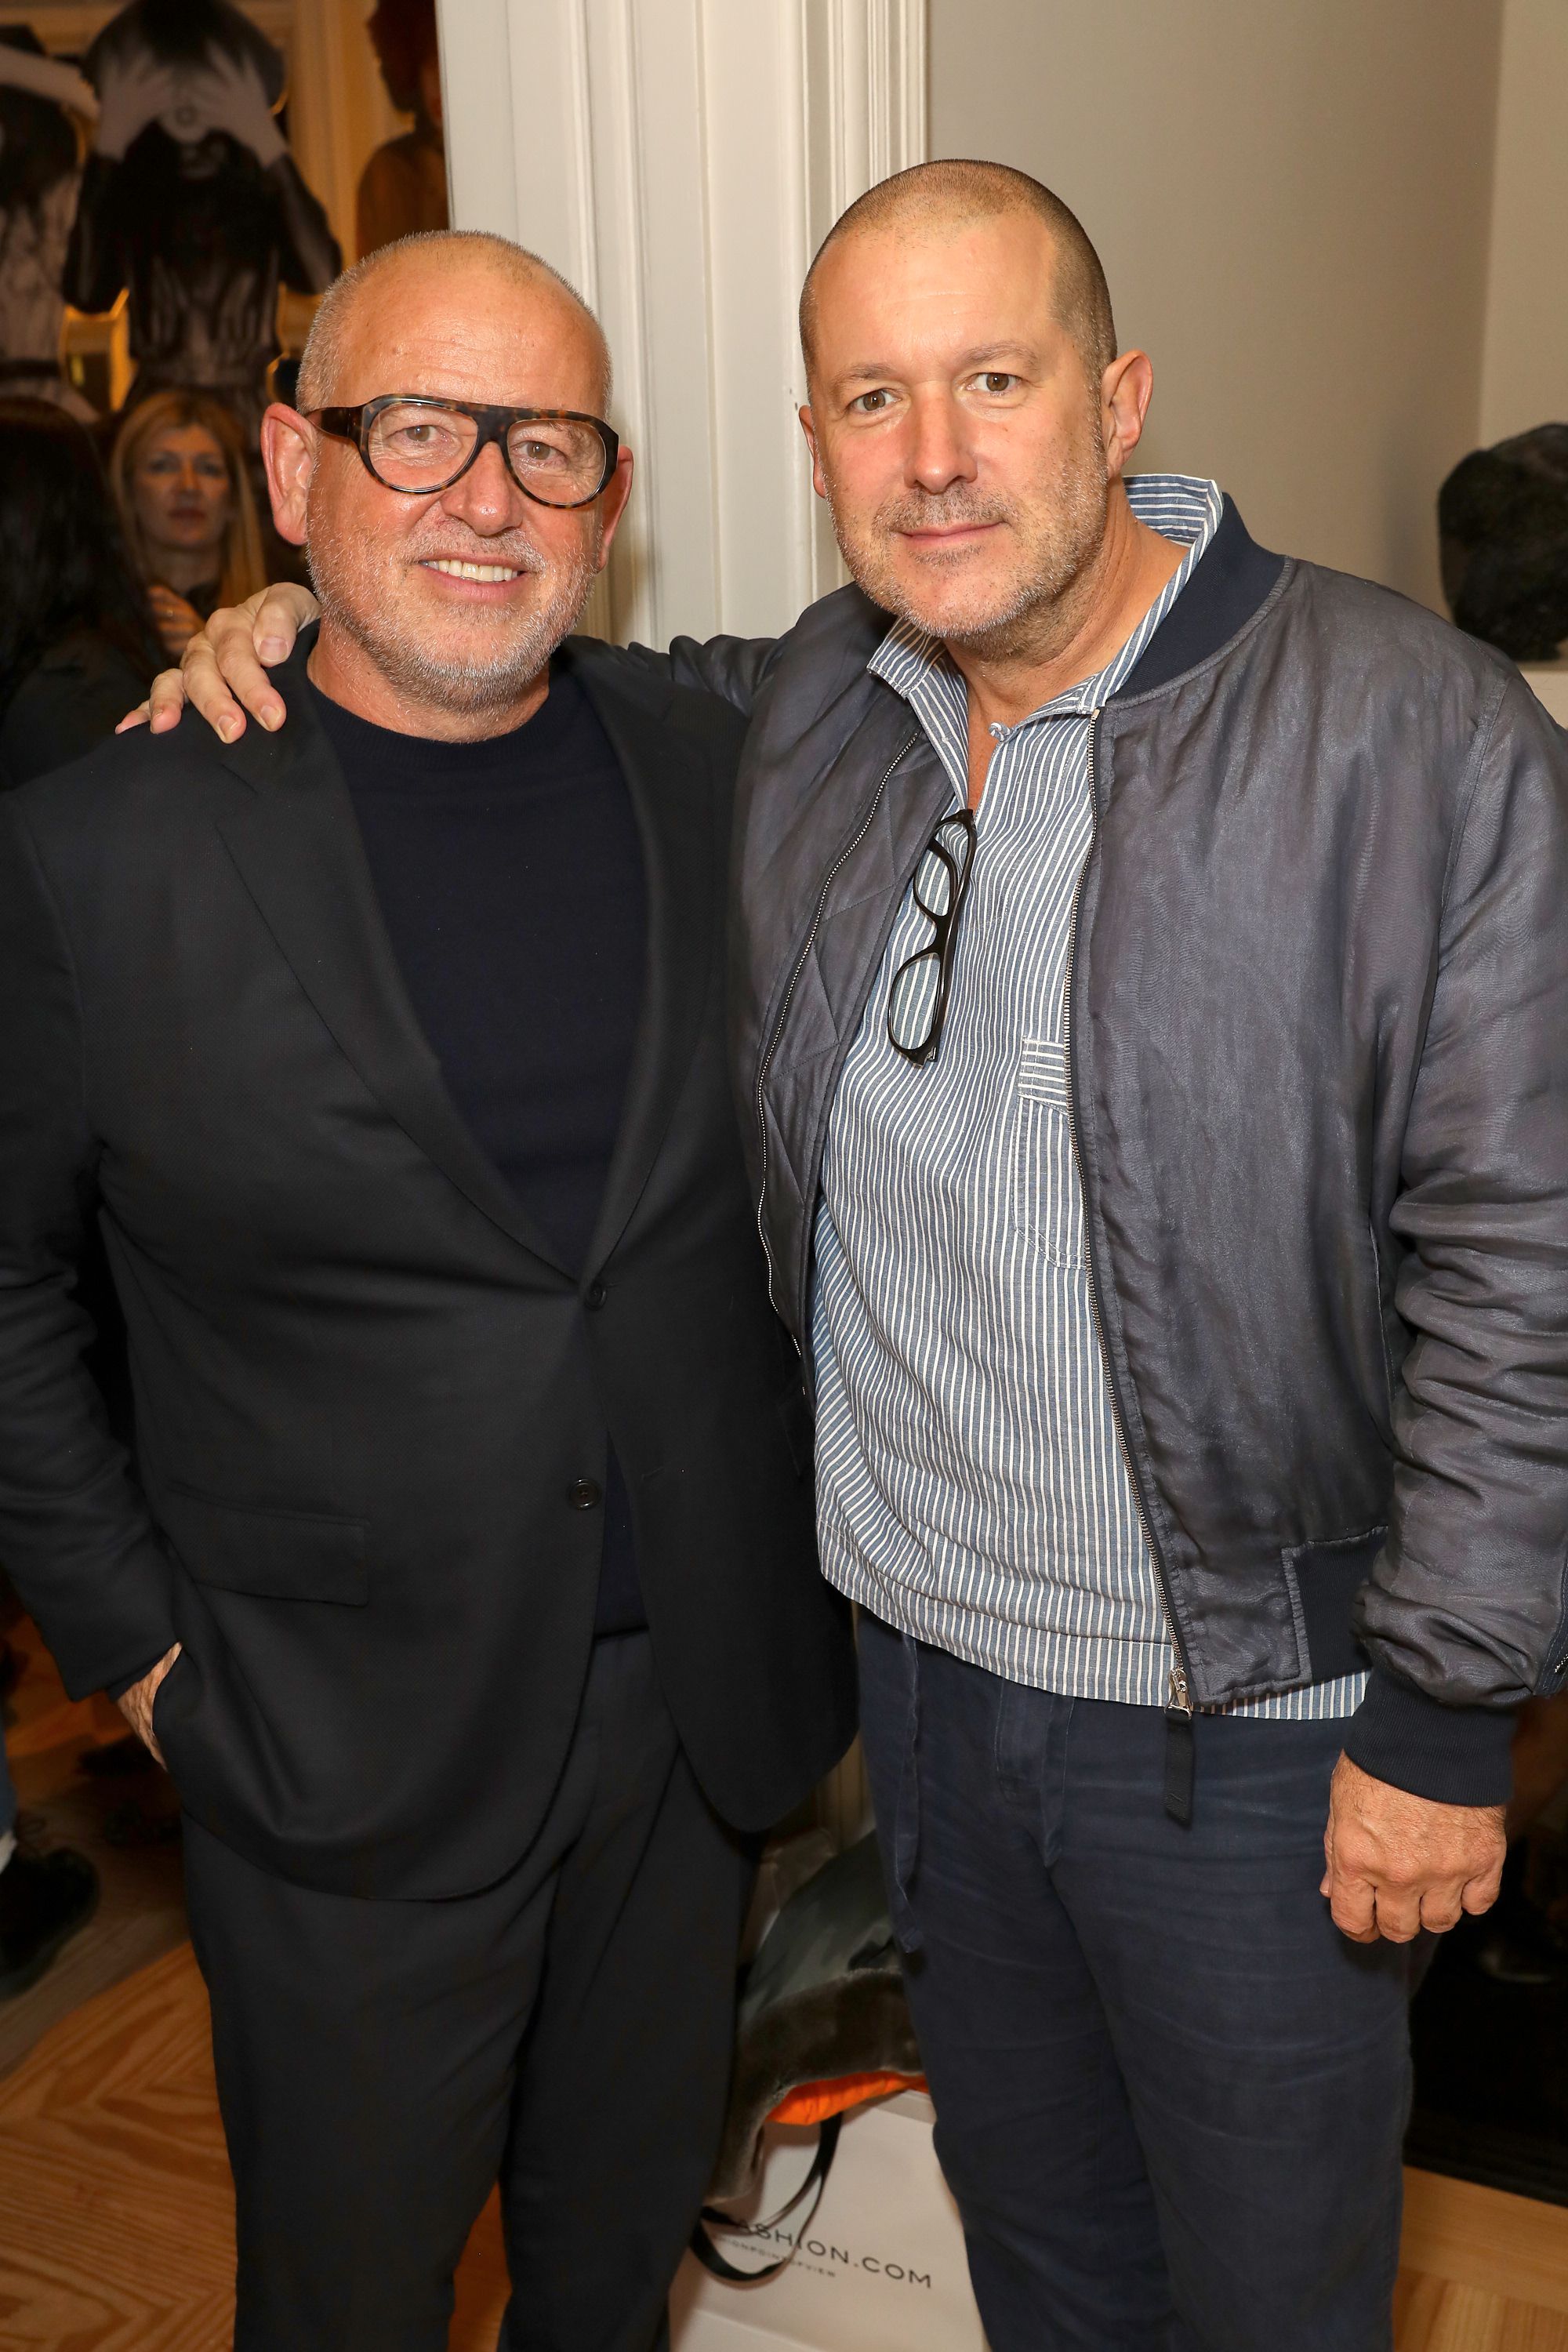 Fabien Baron and Sir Jonathan Ive at the book launch Fabien Baron: Works 1983-2019 at MATCHESFASHION, 5 Carlos Place